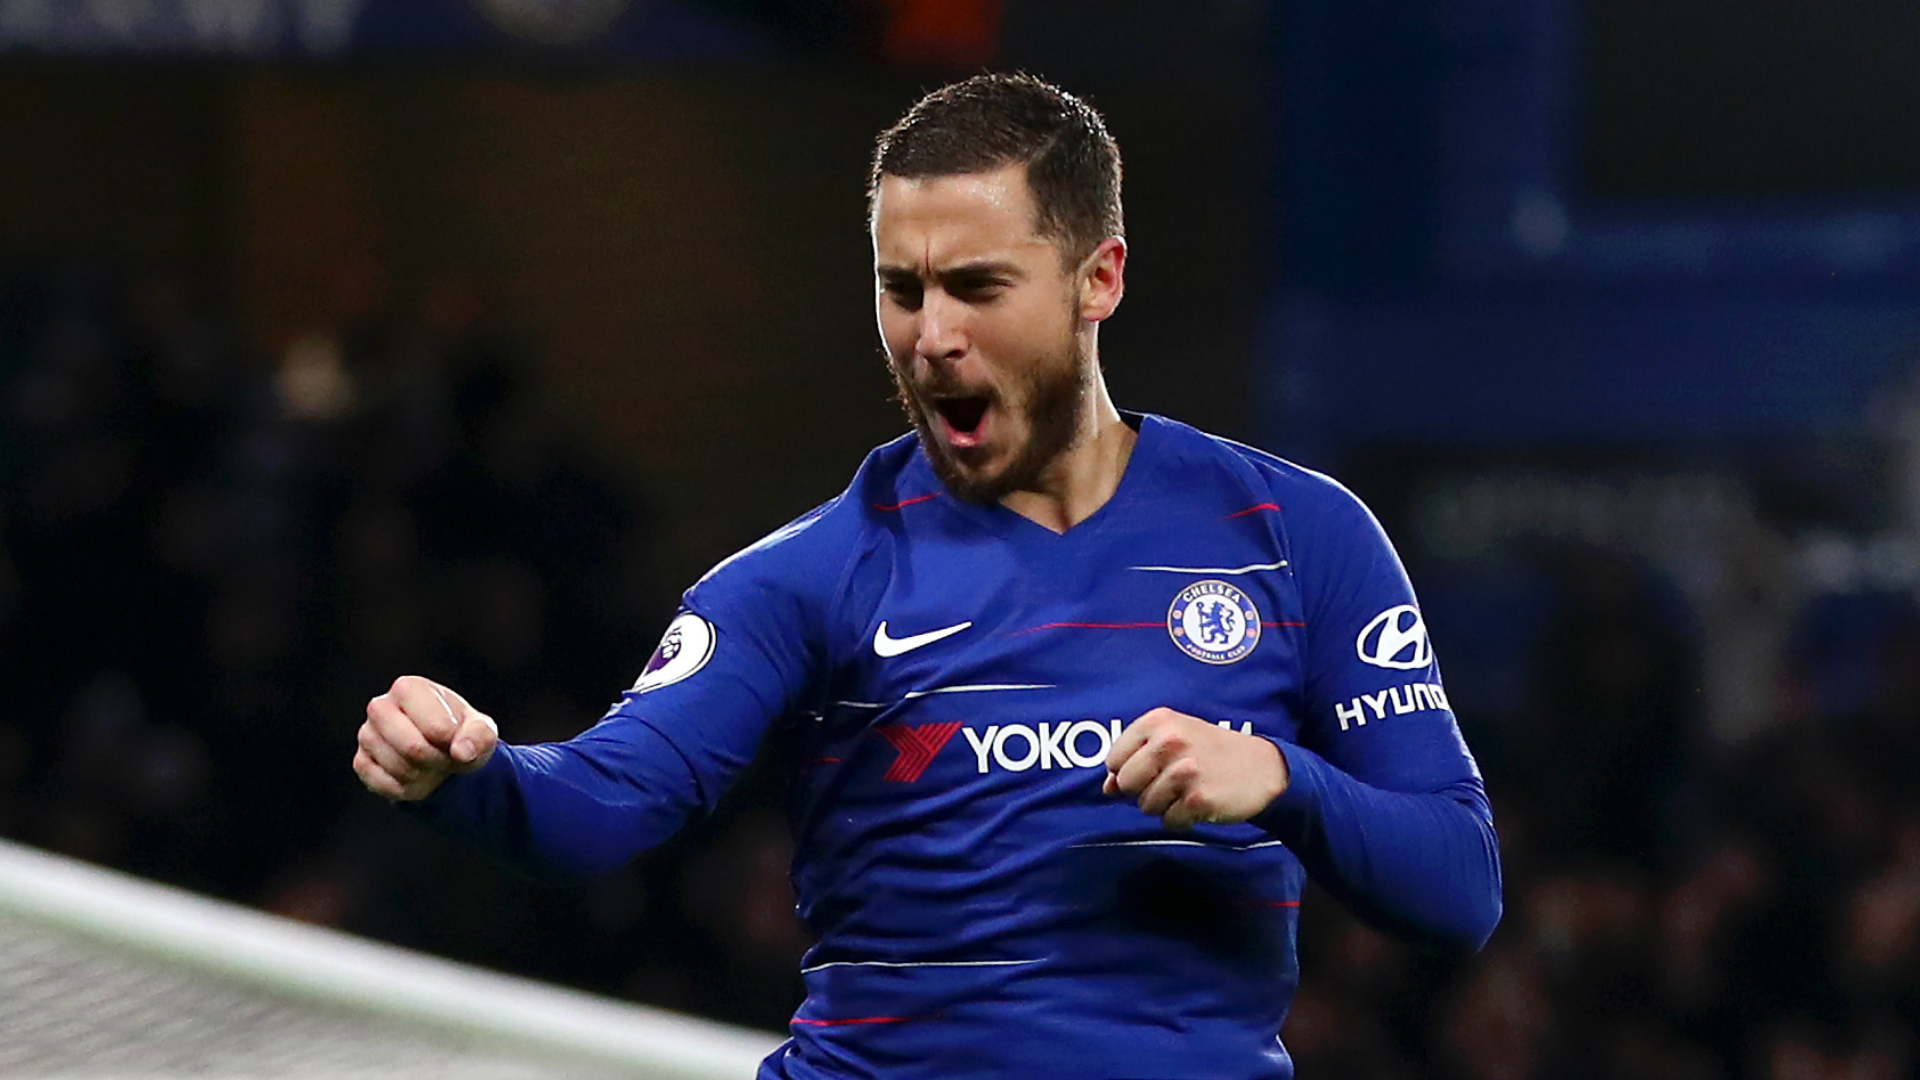 Chelsea assistant boss Gianfranco Zola identified Eden Hazard as the club's best foreign player and hopes to keep him at Stamford Bridge.